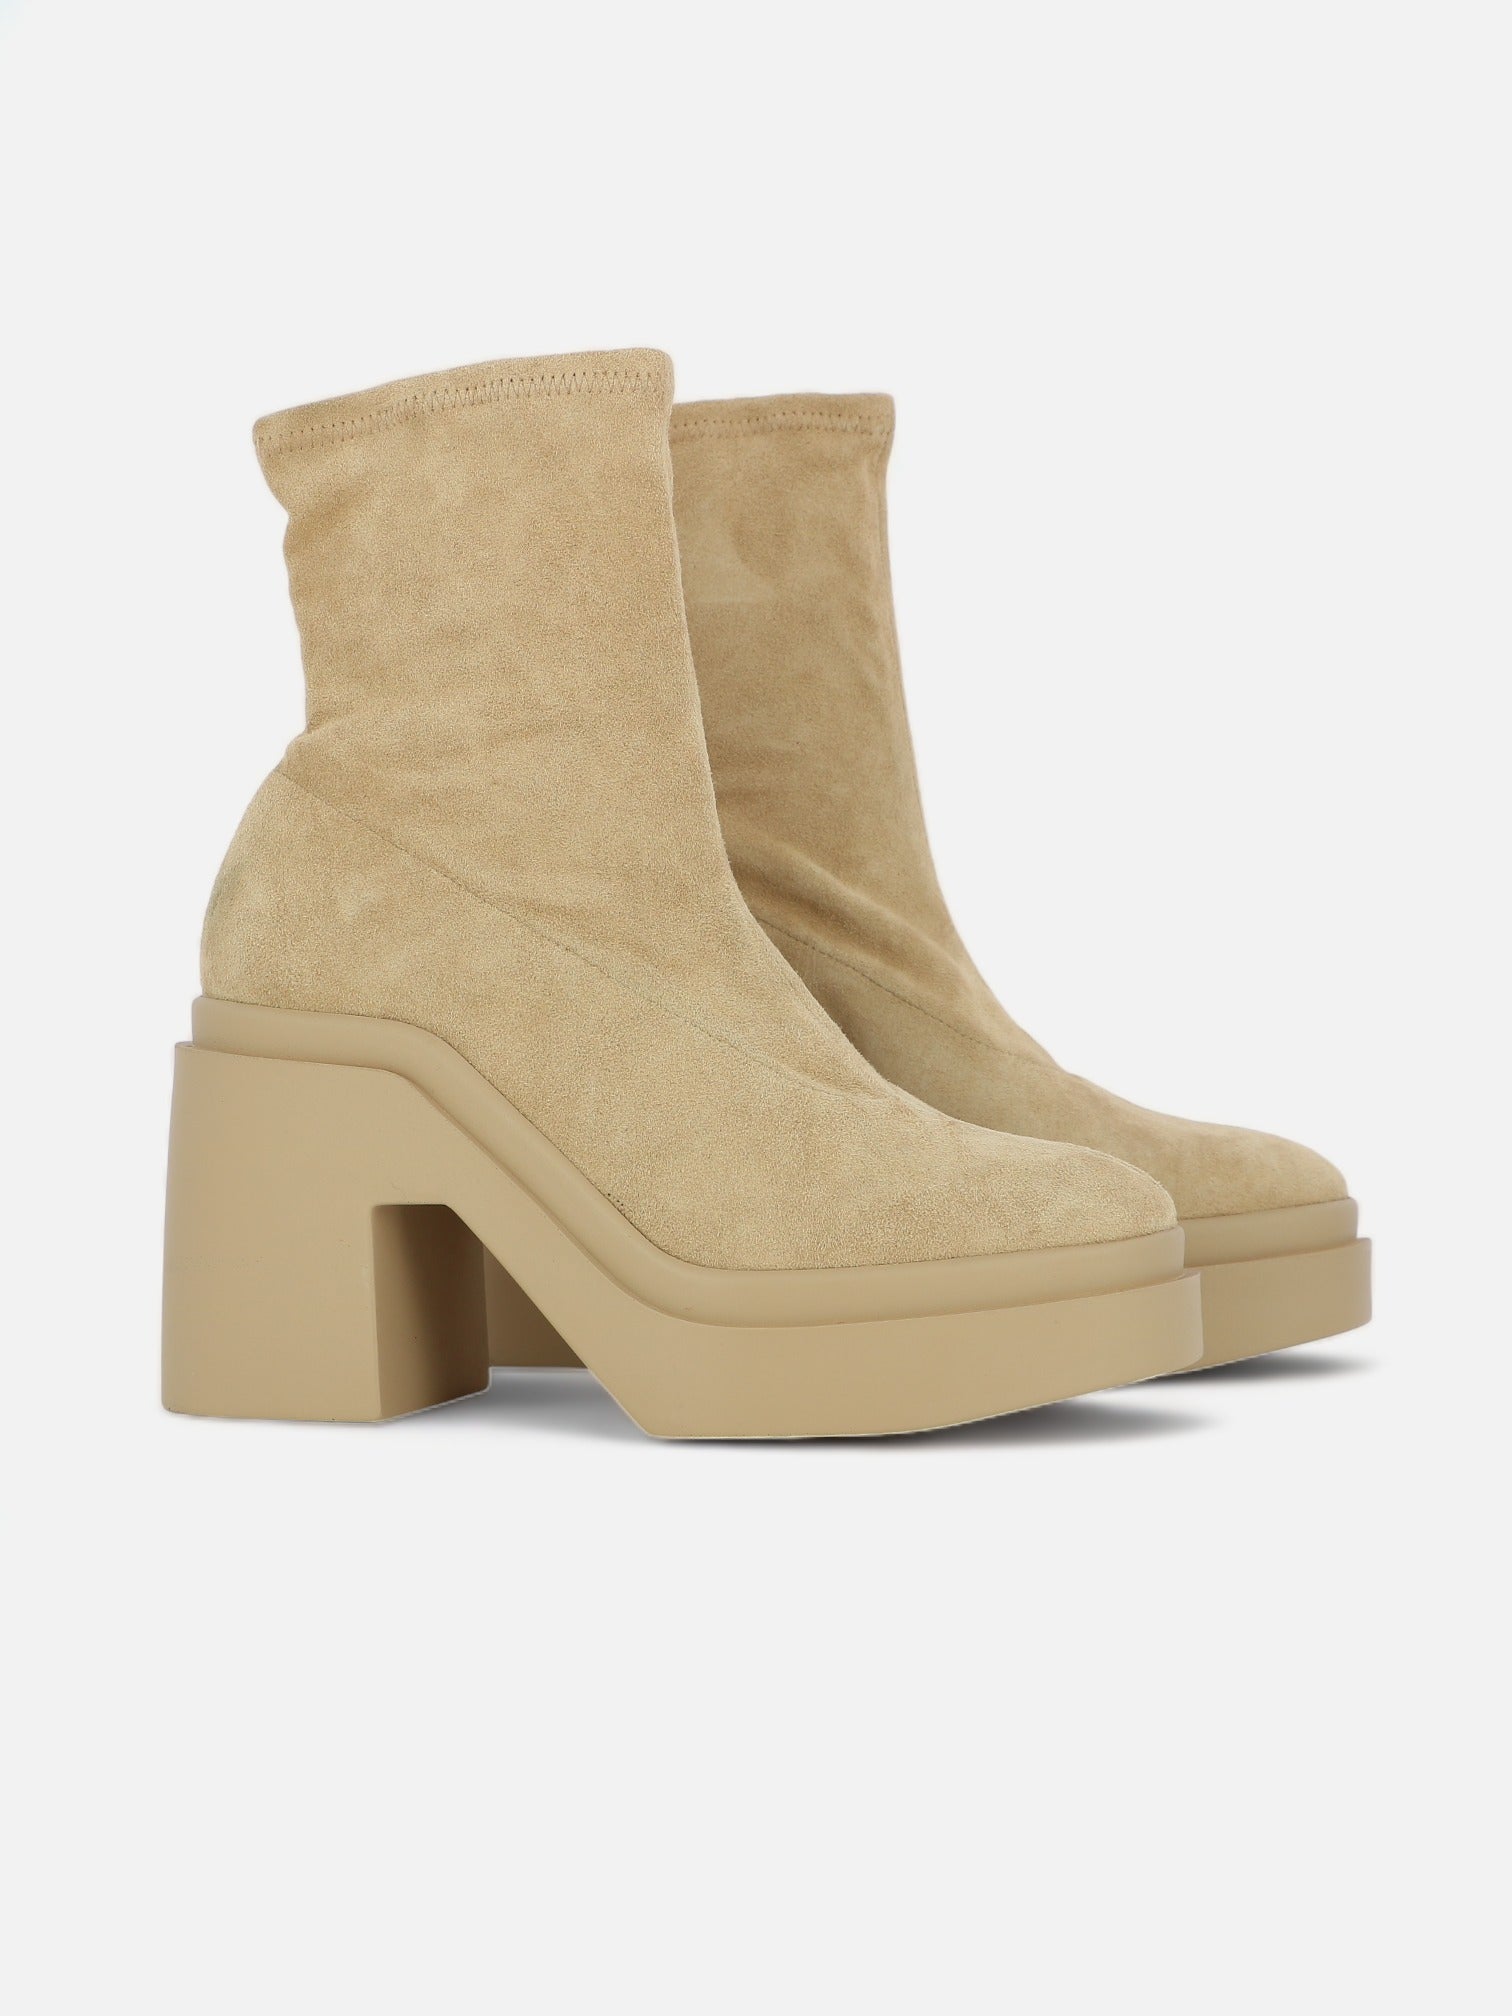 ANKLE BOOTS - NINA ankle boots, suede leather beige - 3606063816946 - Clergerie Paris - Europe